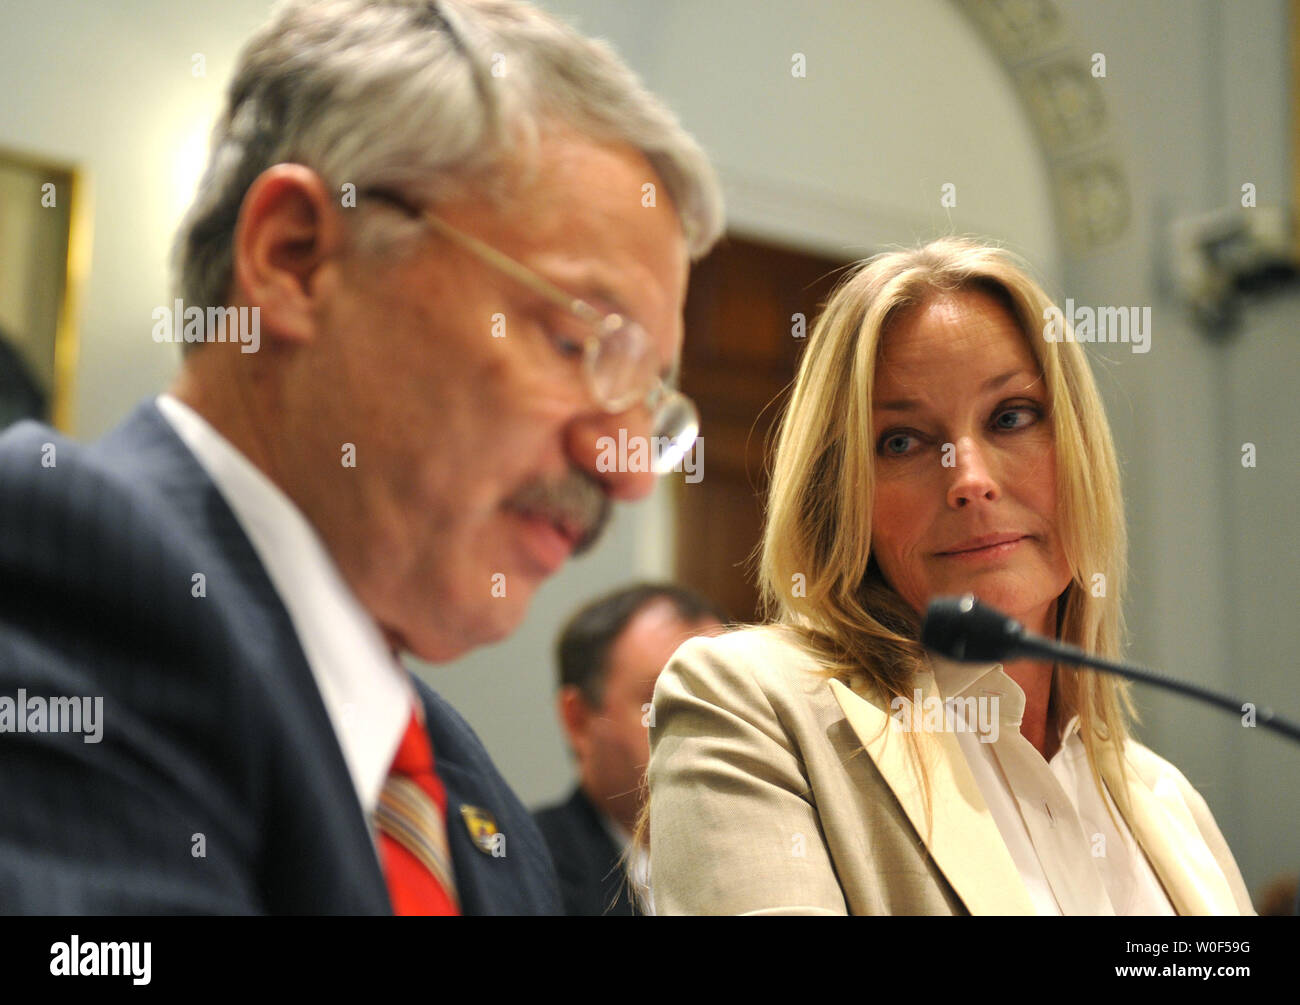 Bo Derek (R), actress and board member of WildAid, watches as Rowan Gould, acting Fish and Wildlife Service Director, testifies during a House Natural Resources Insular Affairs, Oceans and Wildlife Subcommittee hearing on H.R.3086, the 'Global Wildlife Conservation, Coordination, and Enhancement Act of 2009' in Washington on July 28, 2009. (UPI Photo/Kevin Dietsch) Stock Photo